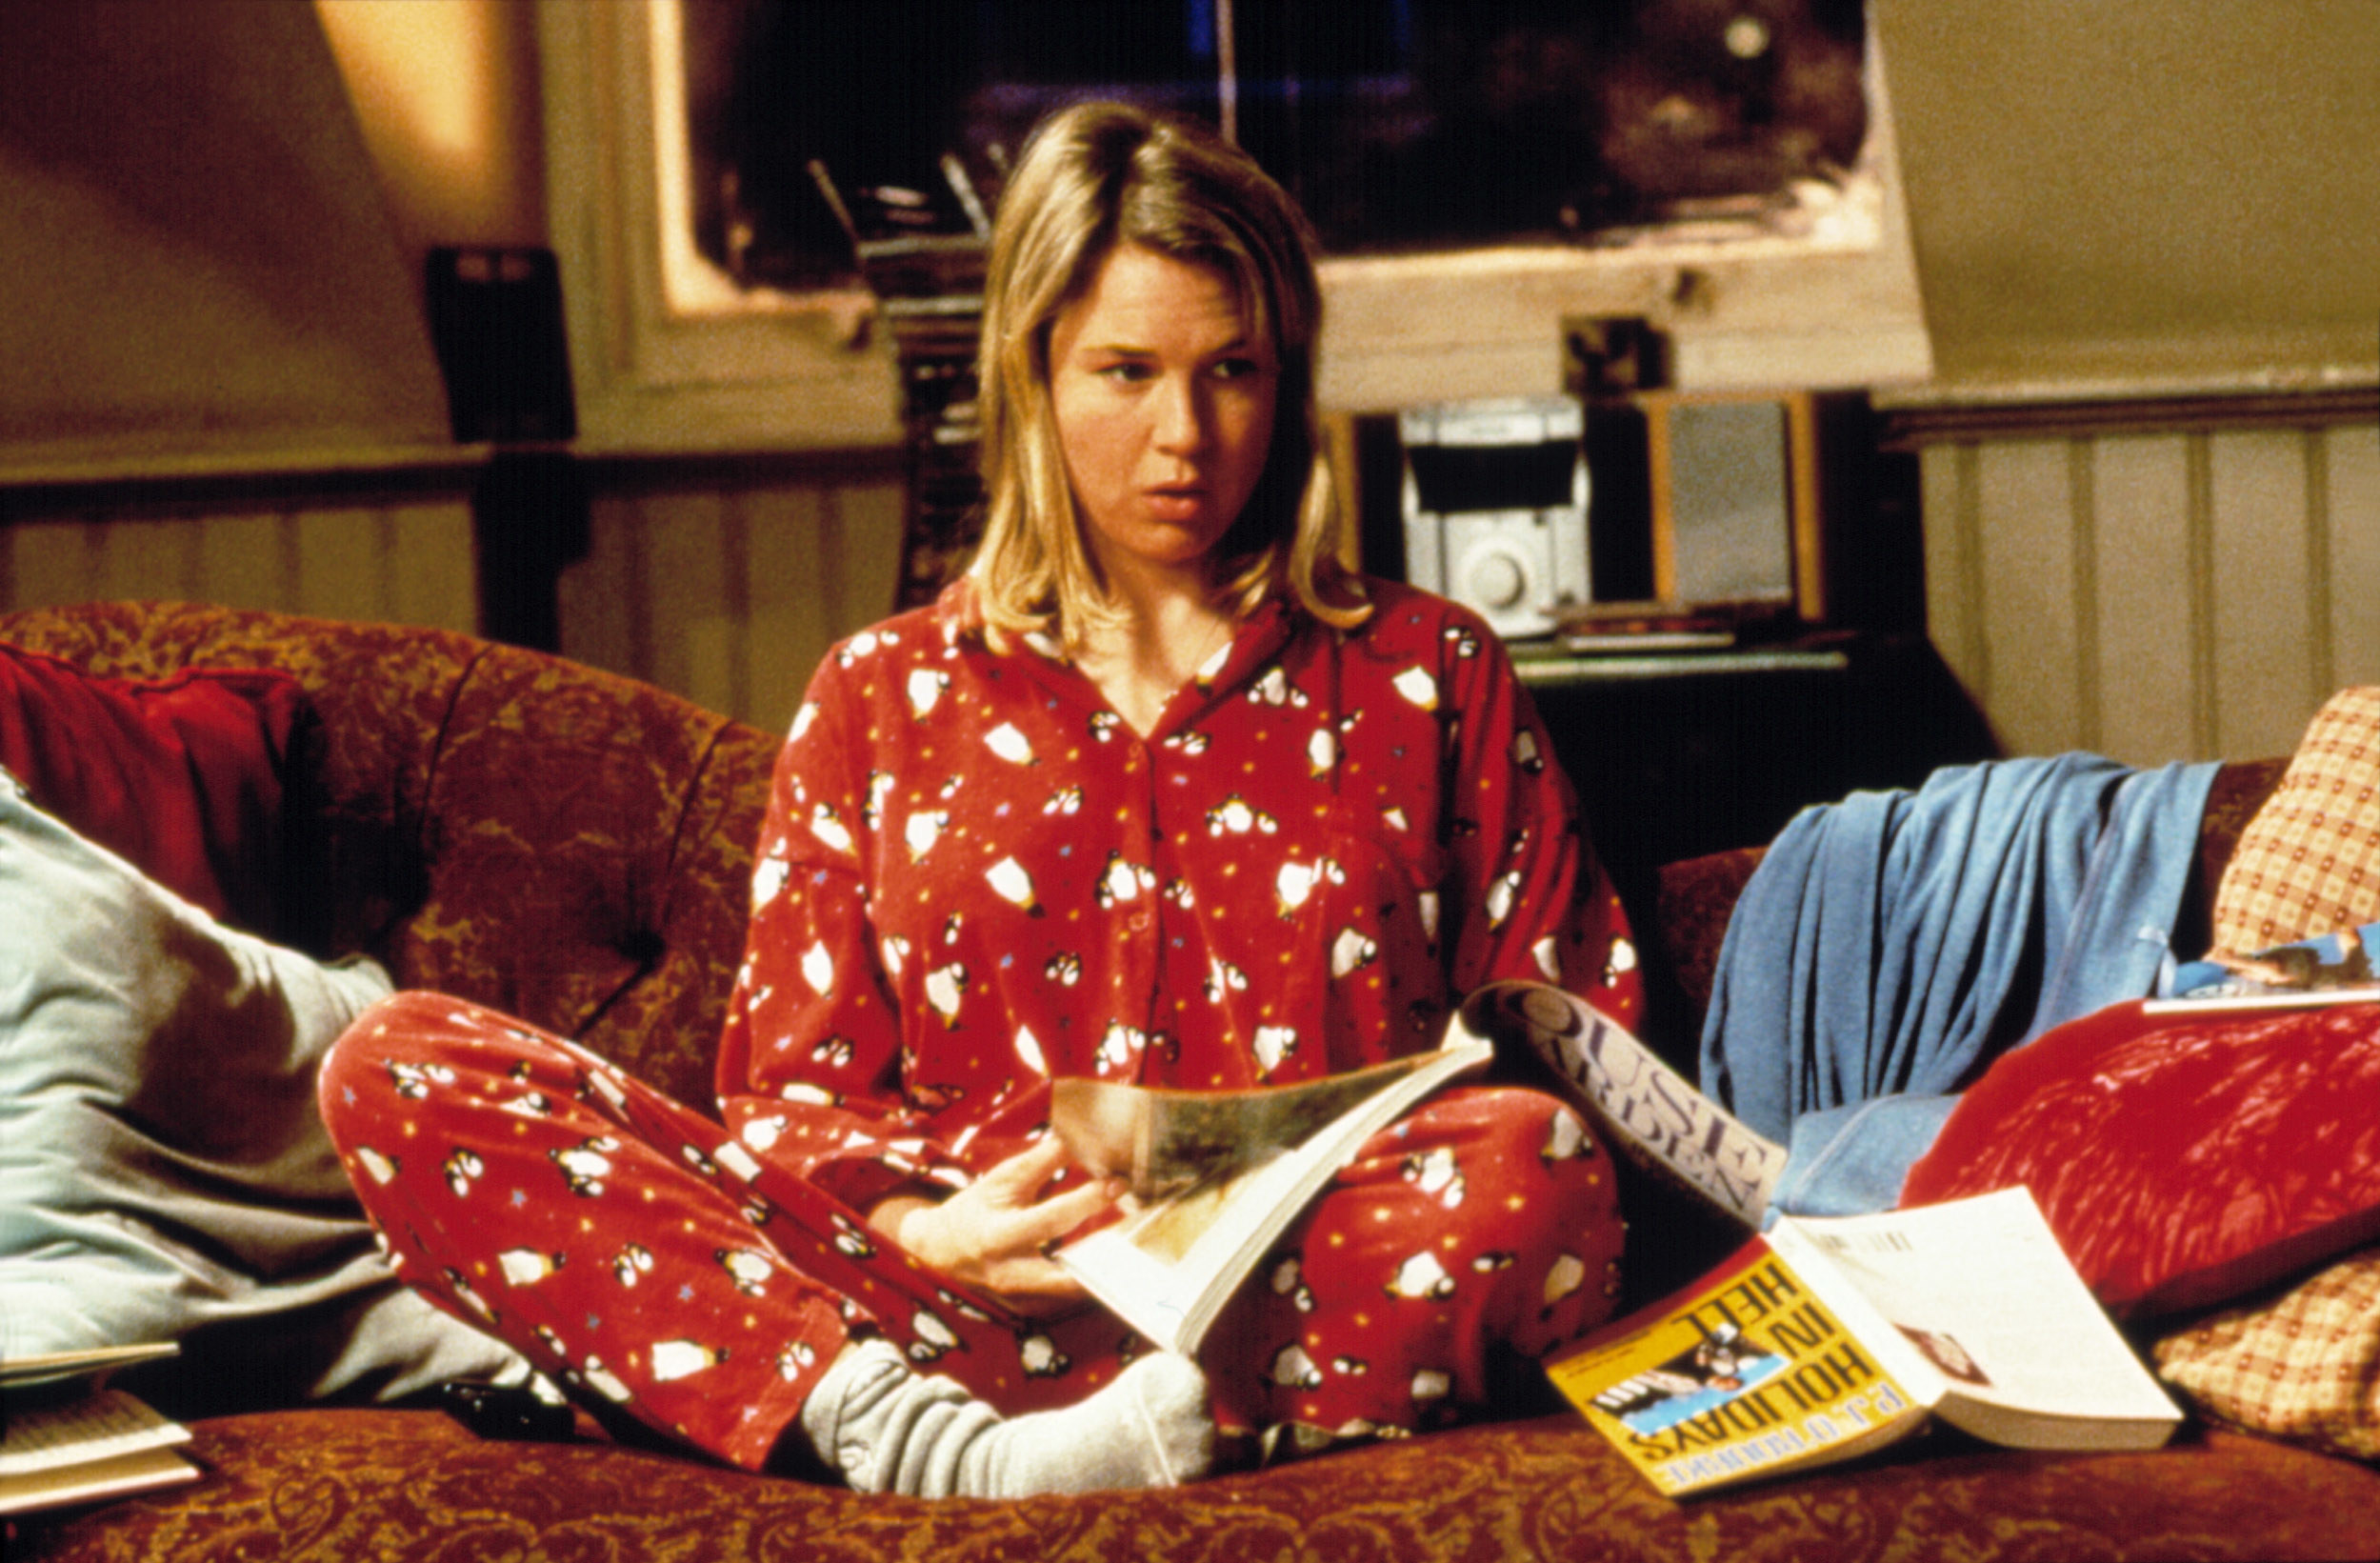 Renee Zellweger sits in pajamas surrounded by self-help books